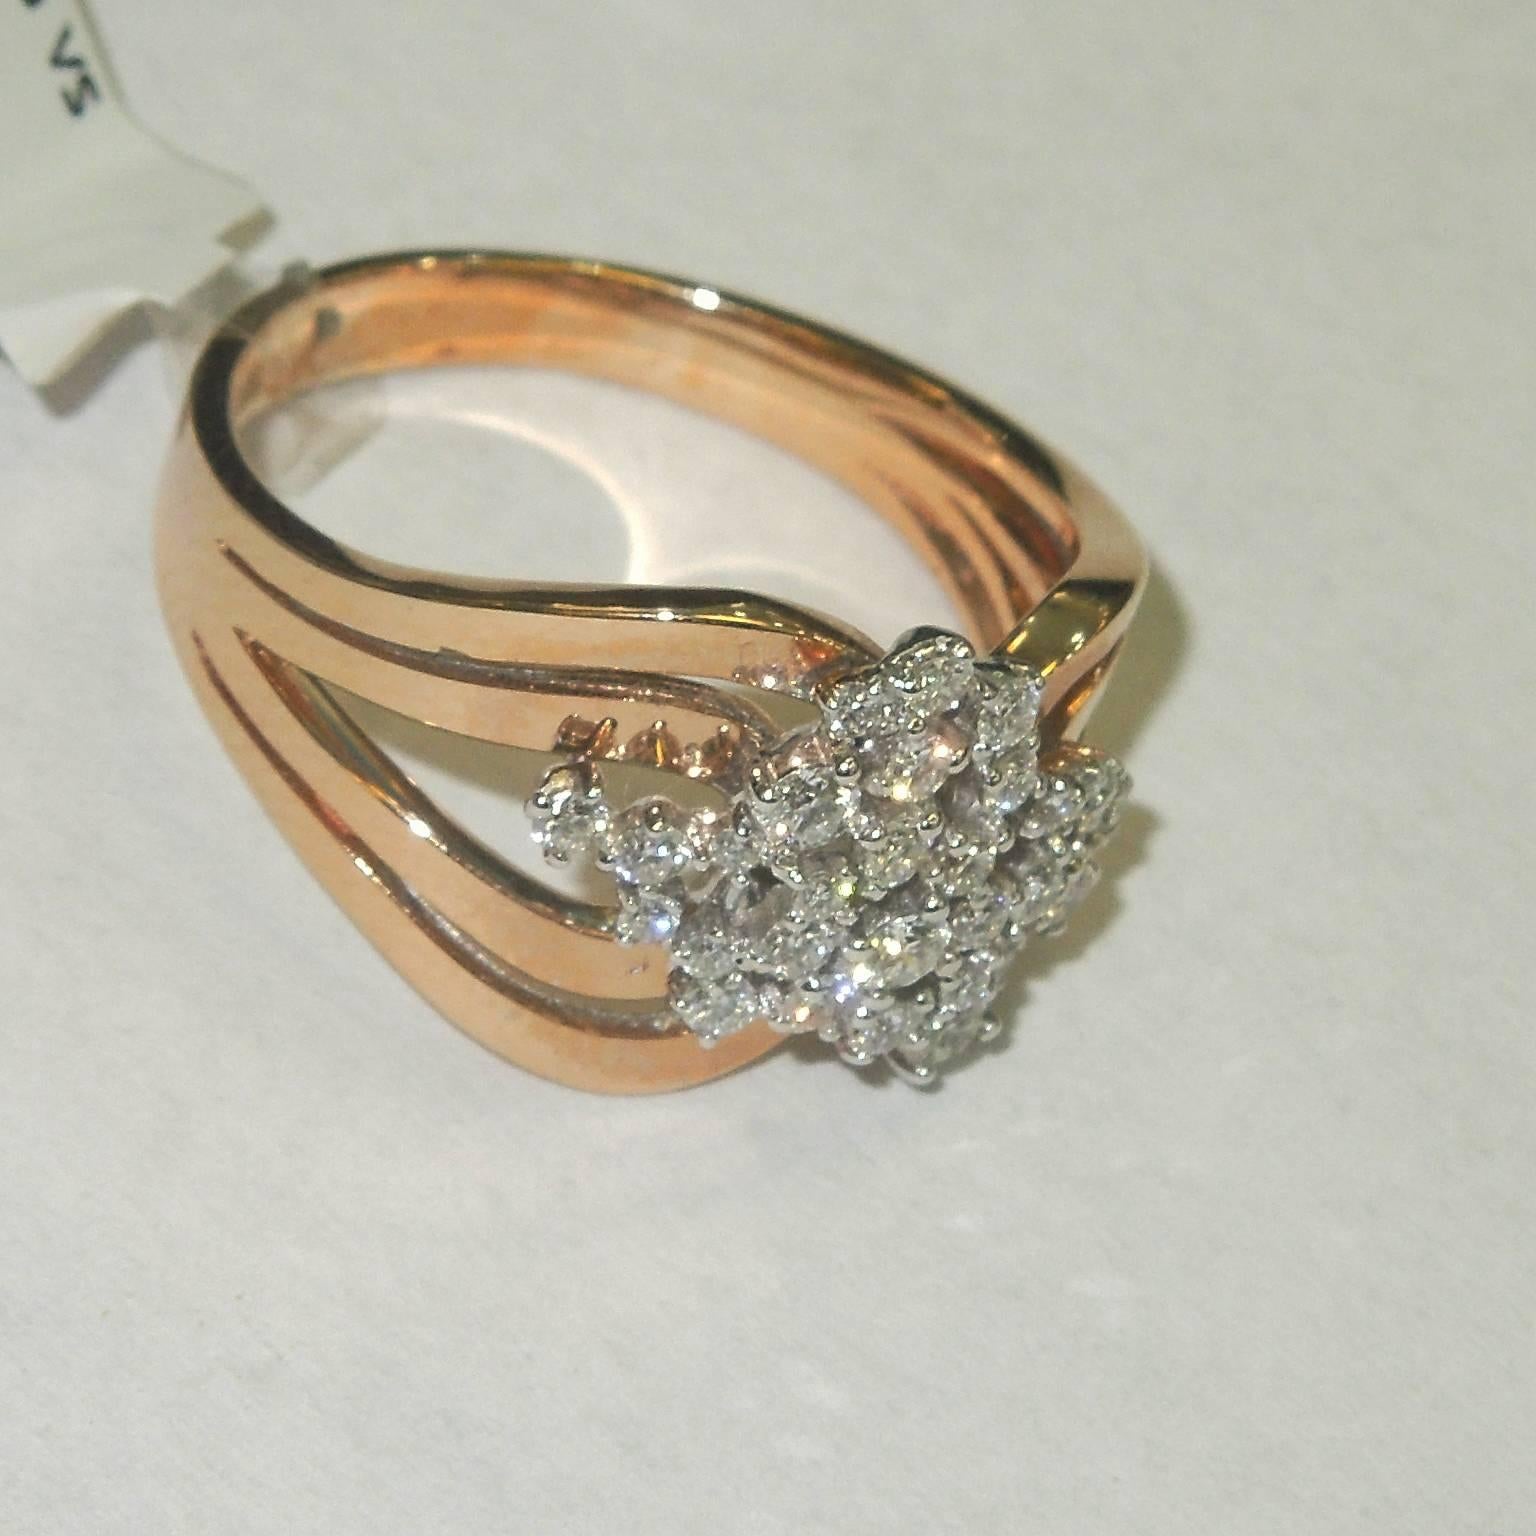 18K Rose Gold Ring with Diamonds

0.45ct. apprx. G Color, VS Clarity Diamonds

0.2 inch band width
0.4 inch face width

5.27 grams 

Available in sizes 5-12.